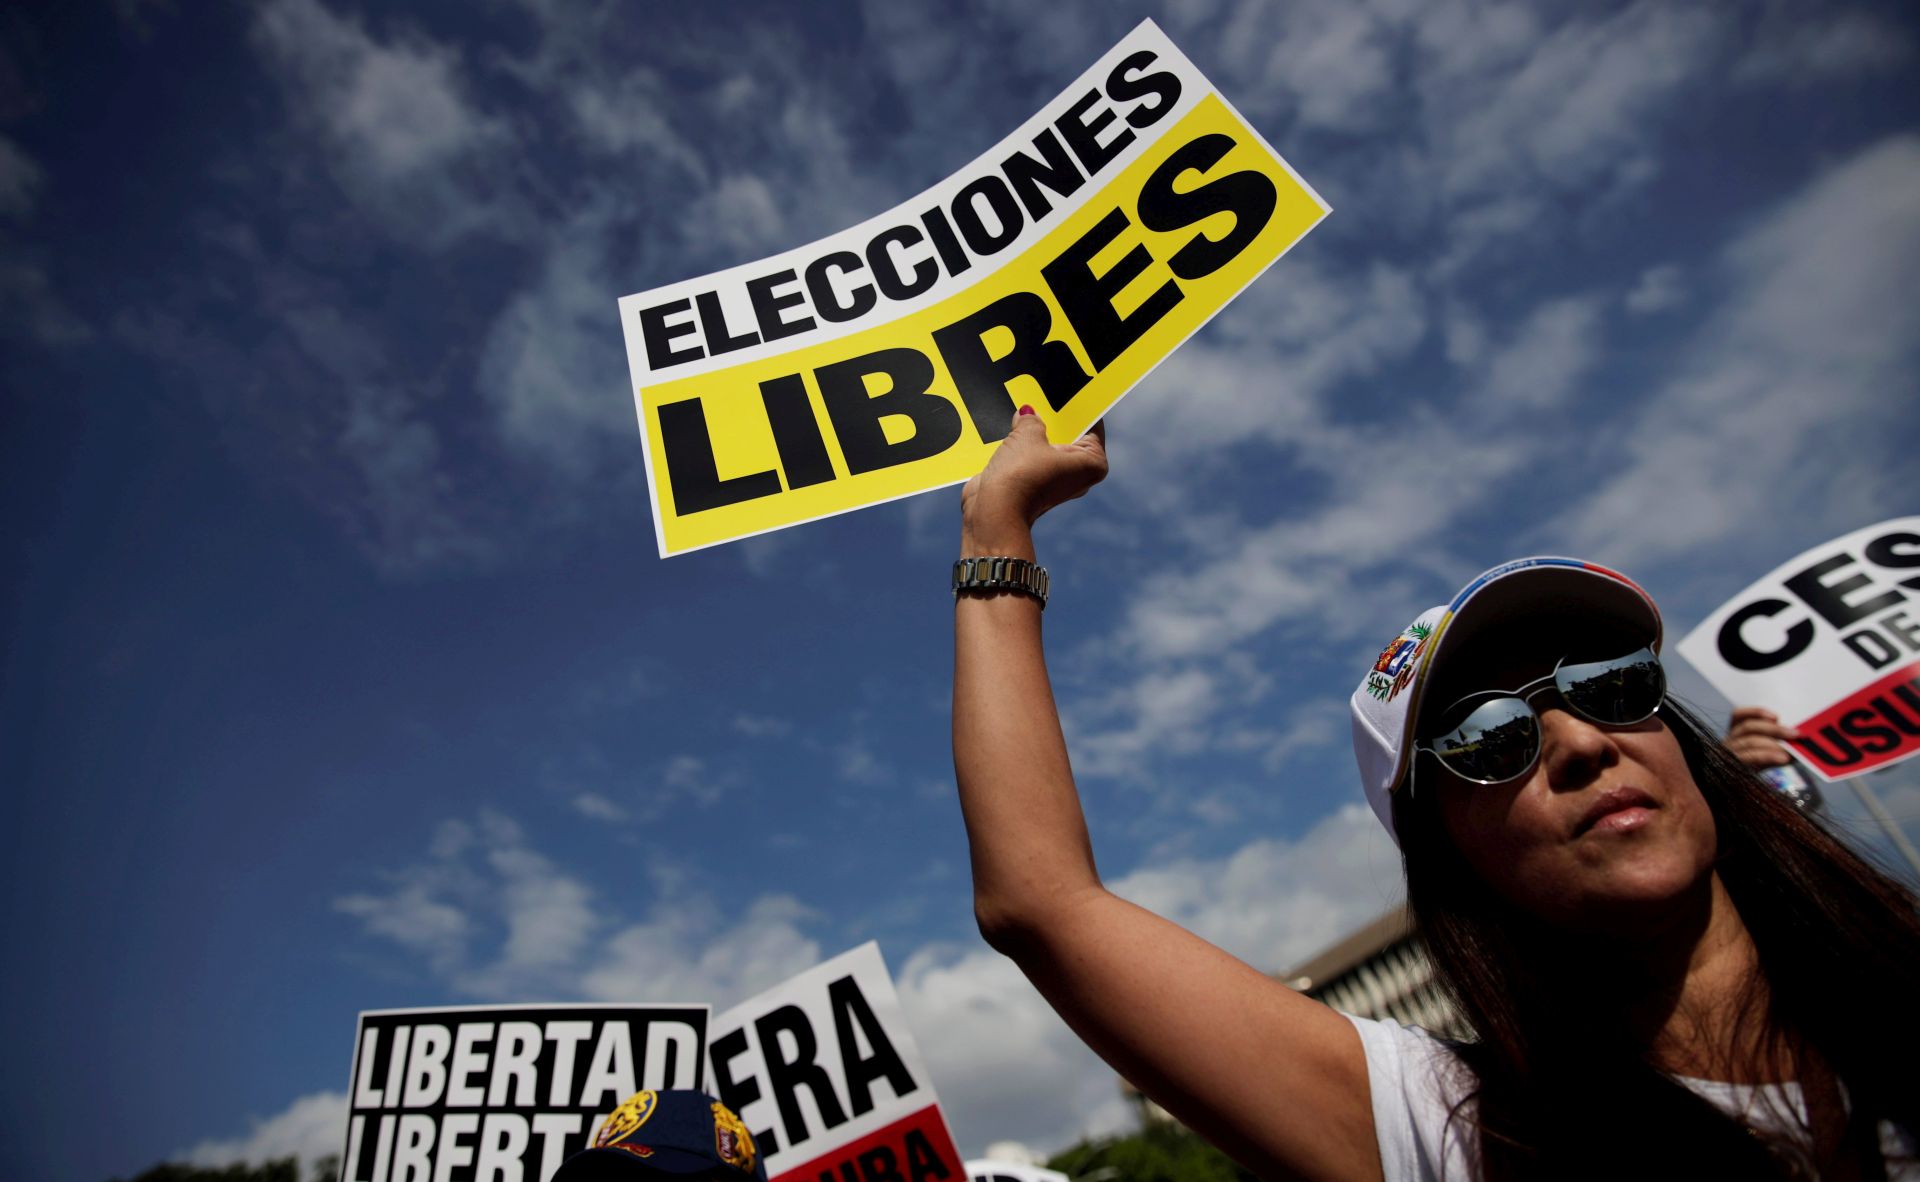 epa07339763 A woman holds a sign that reads 'Free election' during a rally to show support to President of the Venezuelan National Assembly Juan Guaido and protest against the crisis in their country, in Panama City, Panama, 02 February 2019. Venezuela's President Maduro and his opponent National Assembly leader Juan Guaido have called on their supporters to take to the streets as international pressure increased on Maduro to resign. Guiado had declared himself interim president of Venezuela on 23 January and promised to guide the country toward new election as he consider last May's election not valid.  EPA/Bienvenido Velasco